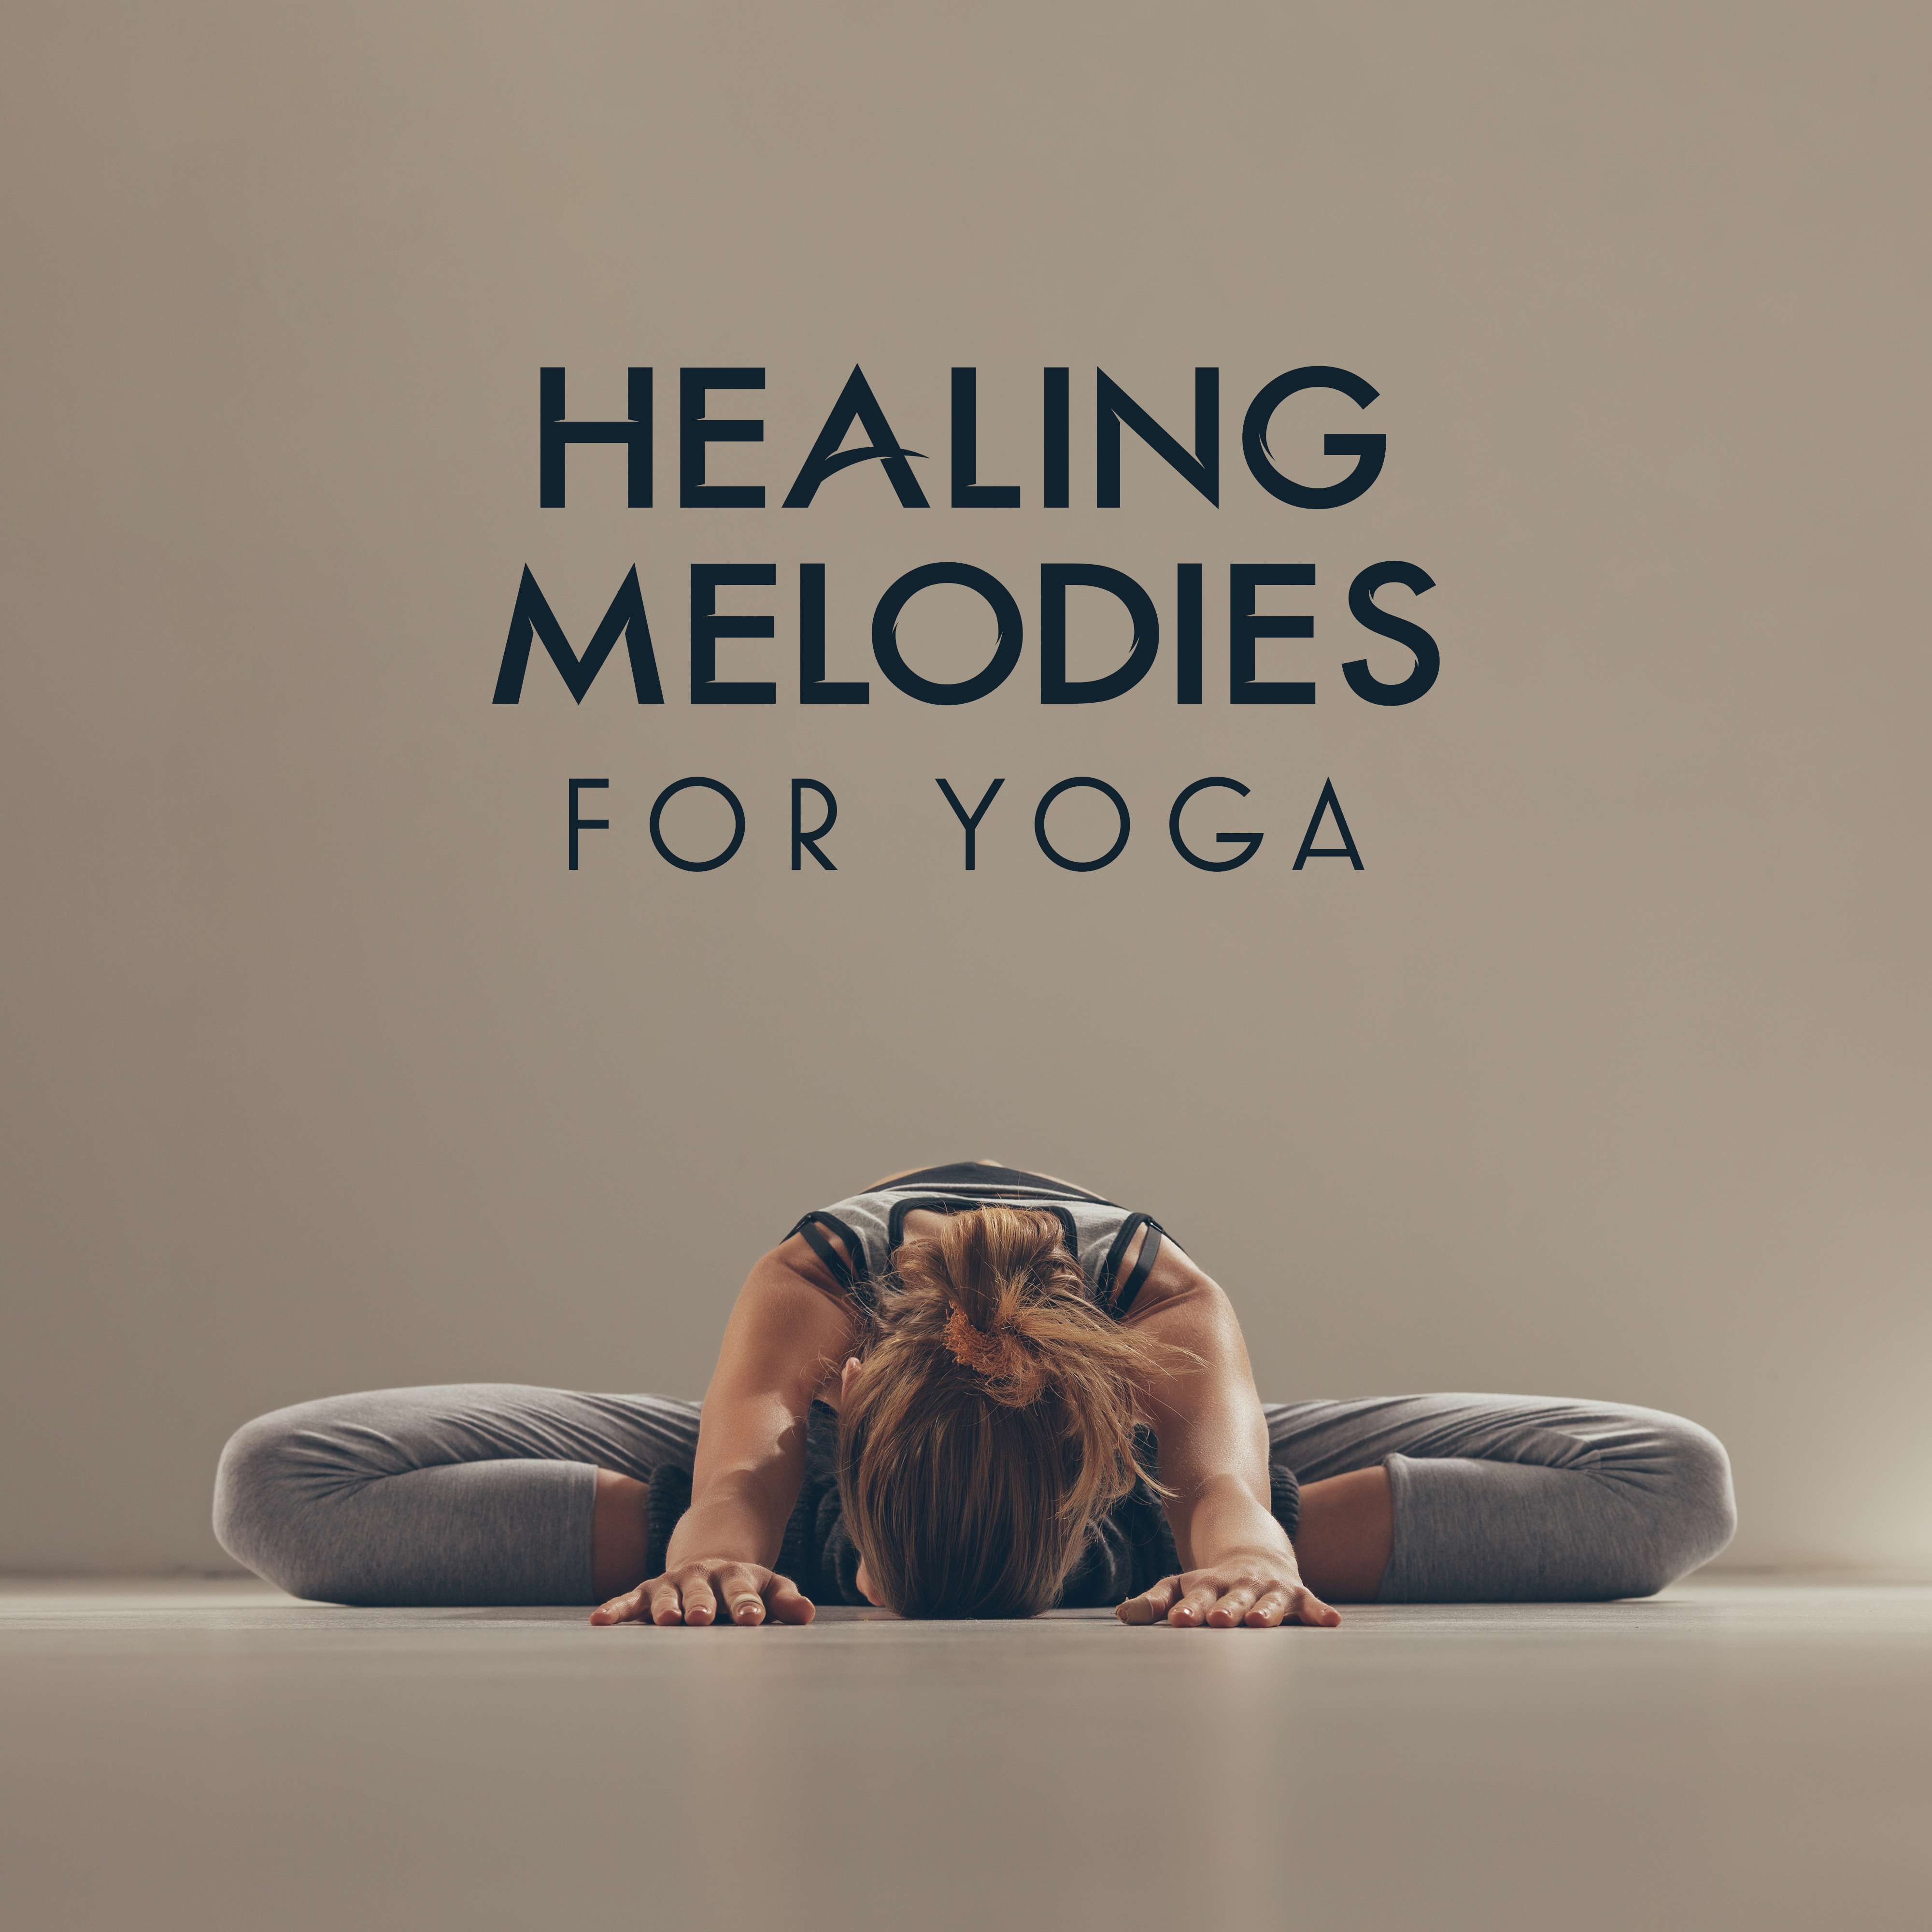 Healing Melodies for Yoga